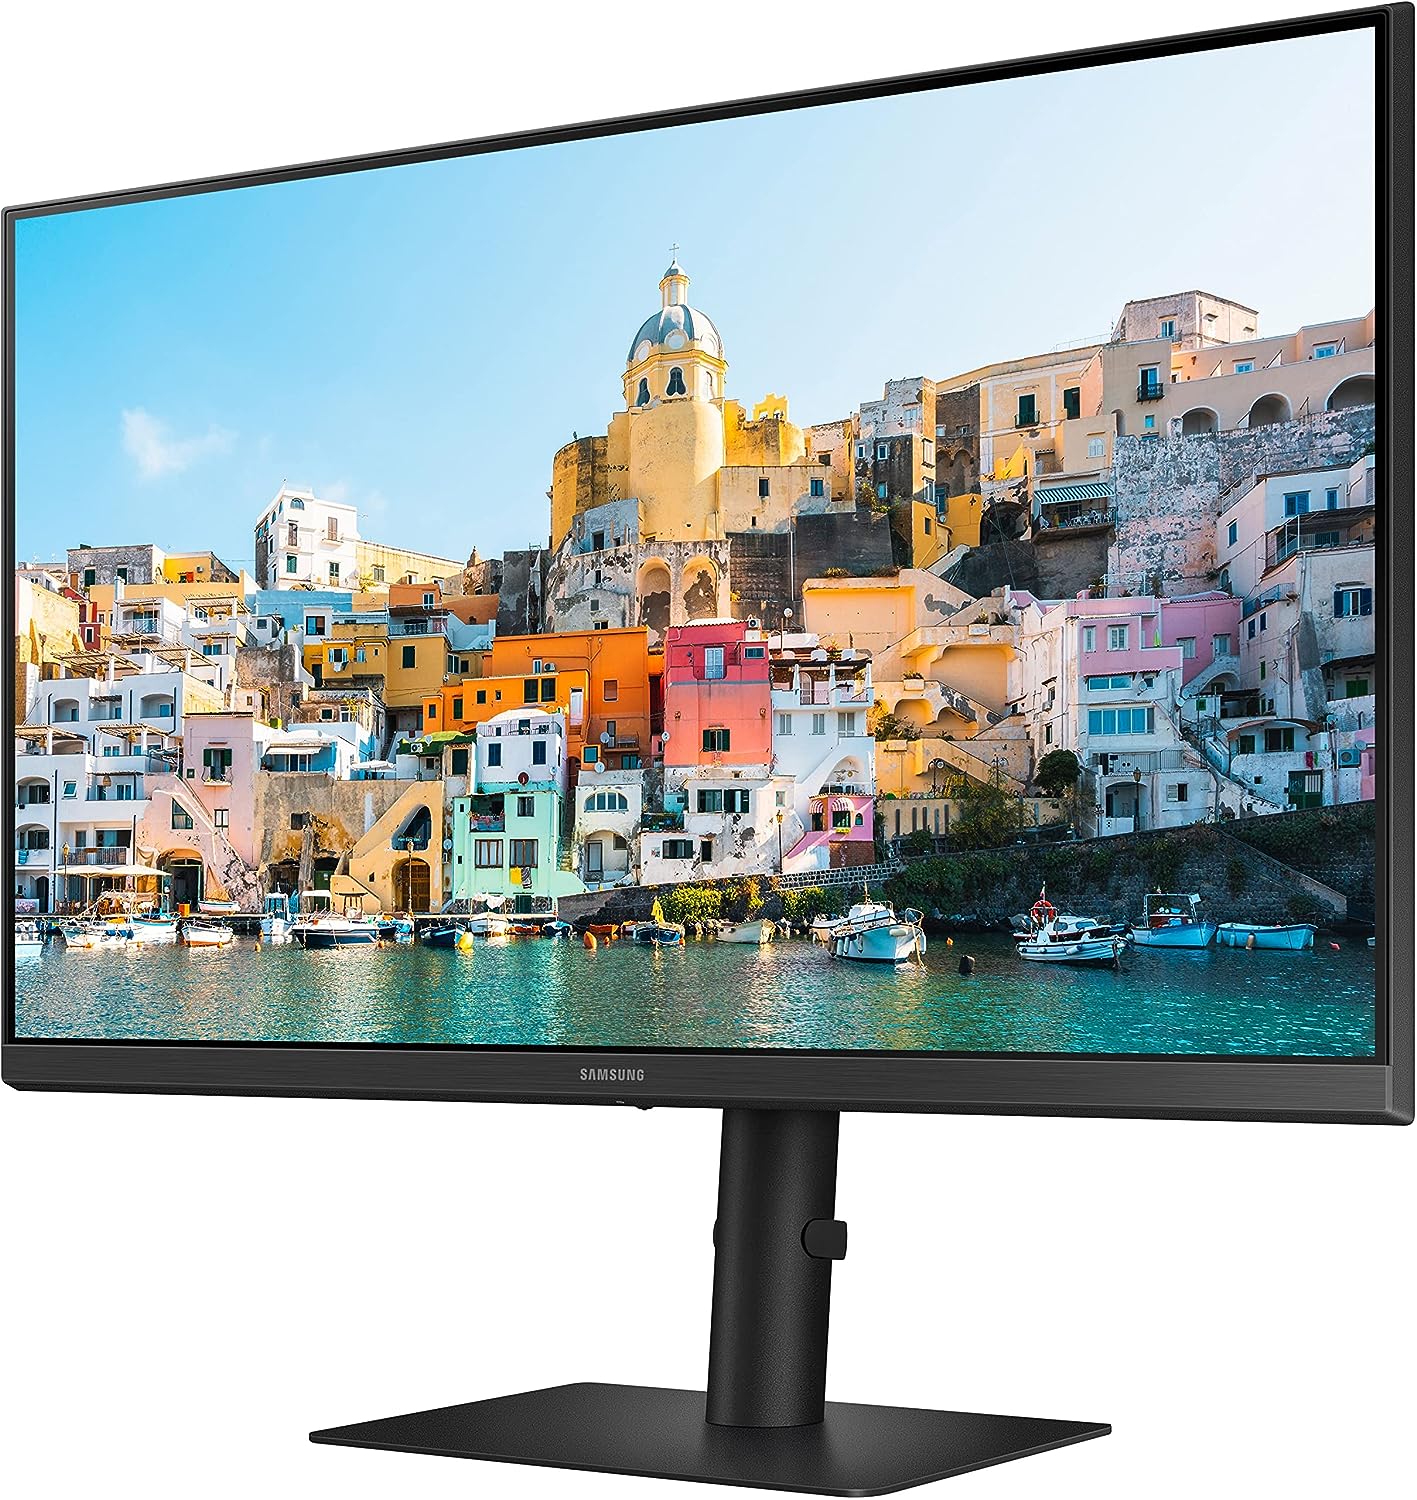 Samsung 24 inch Flat Monitor With USB type-C and Ergonomic Design (S24A400UJW)